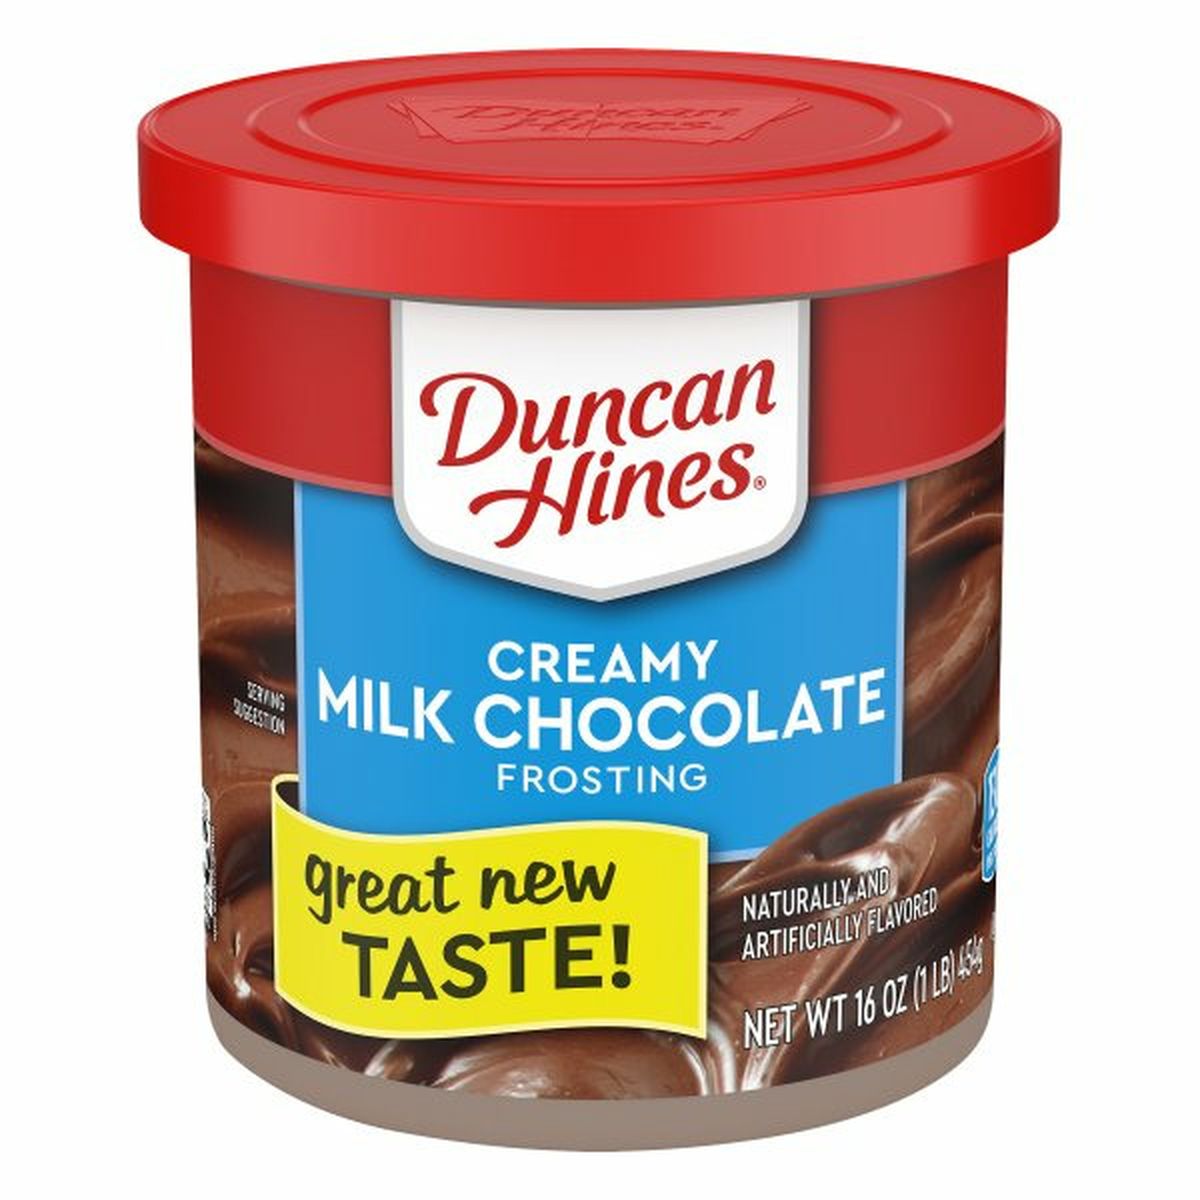 Calories in Duncan Hines Frosting, Milk Chocolate, Creamy